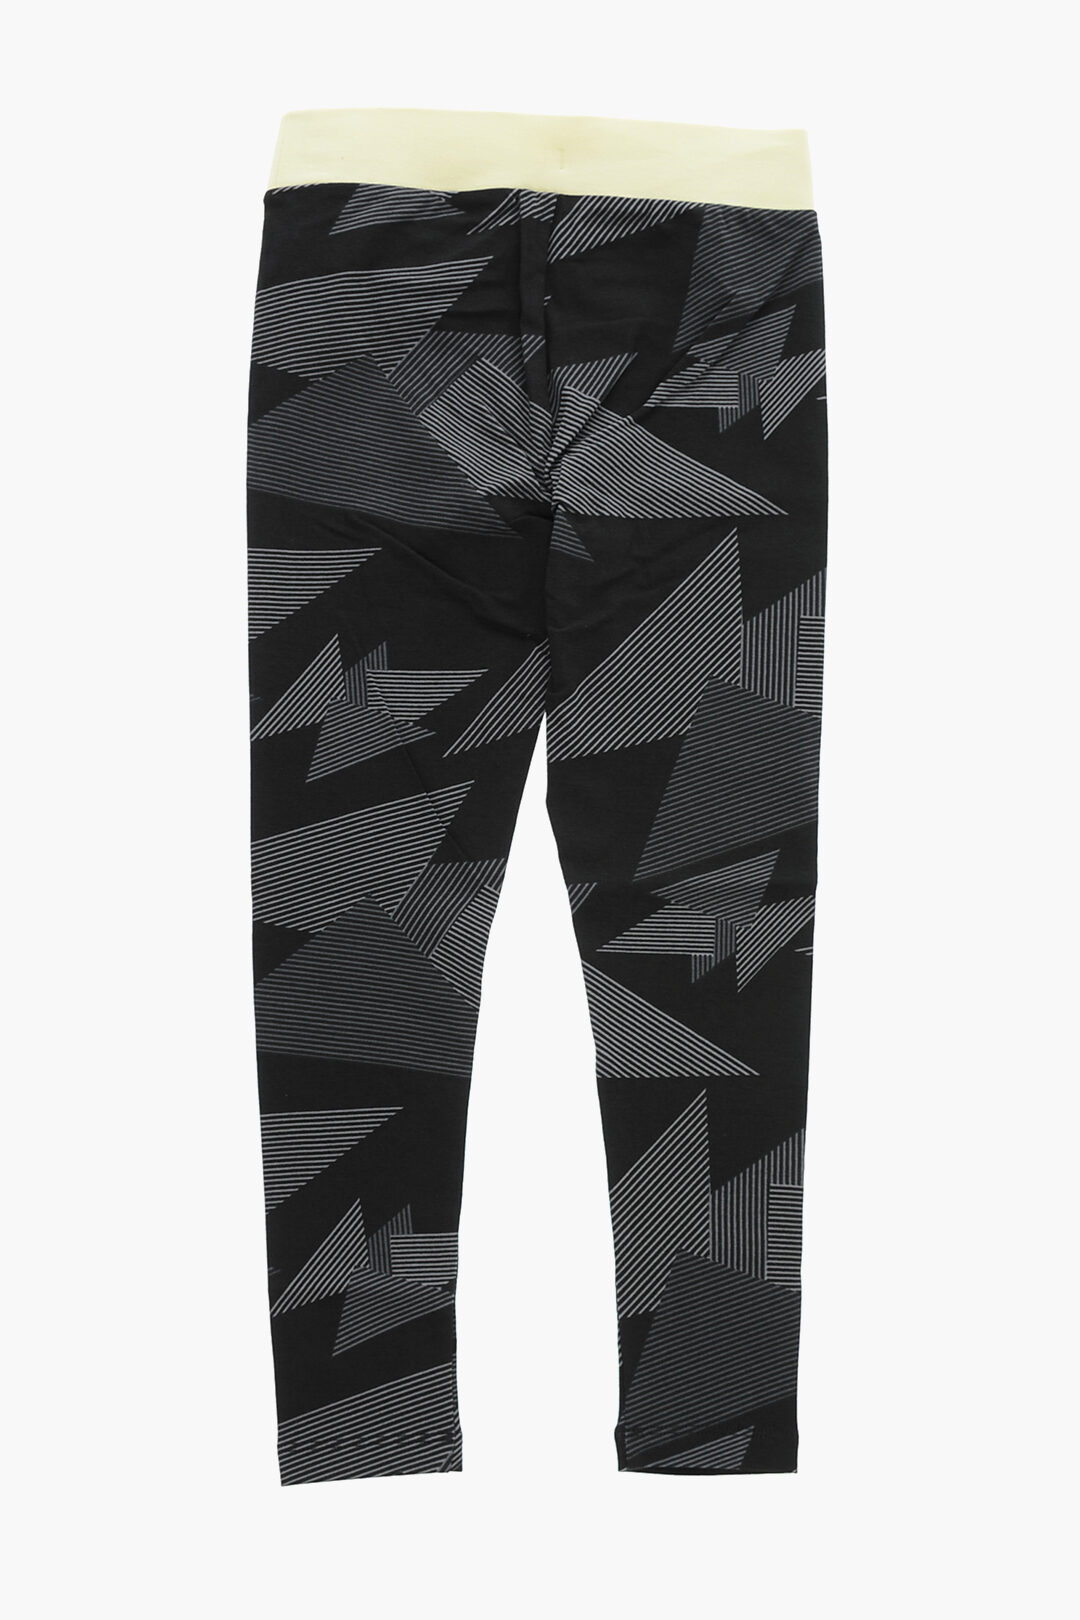 AIR JORDAN Printed Leggings with Contrast Band on the Waist